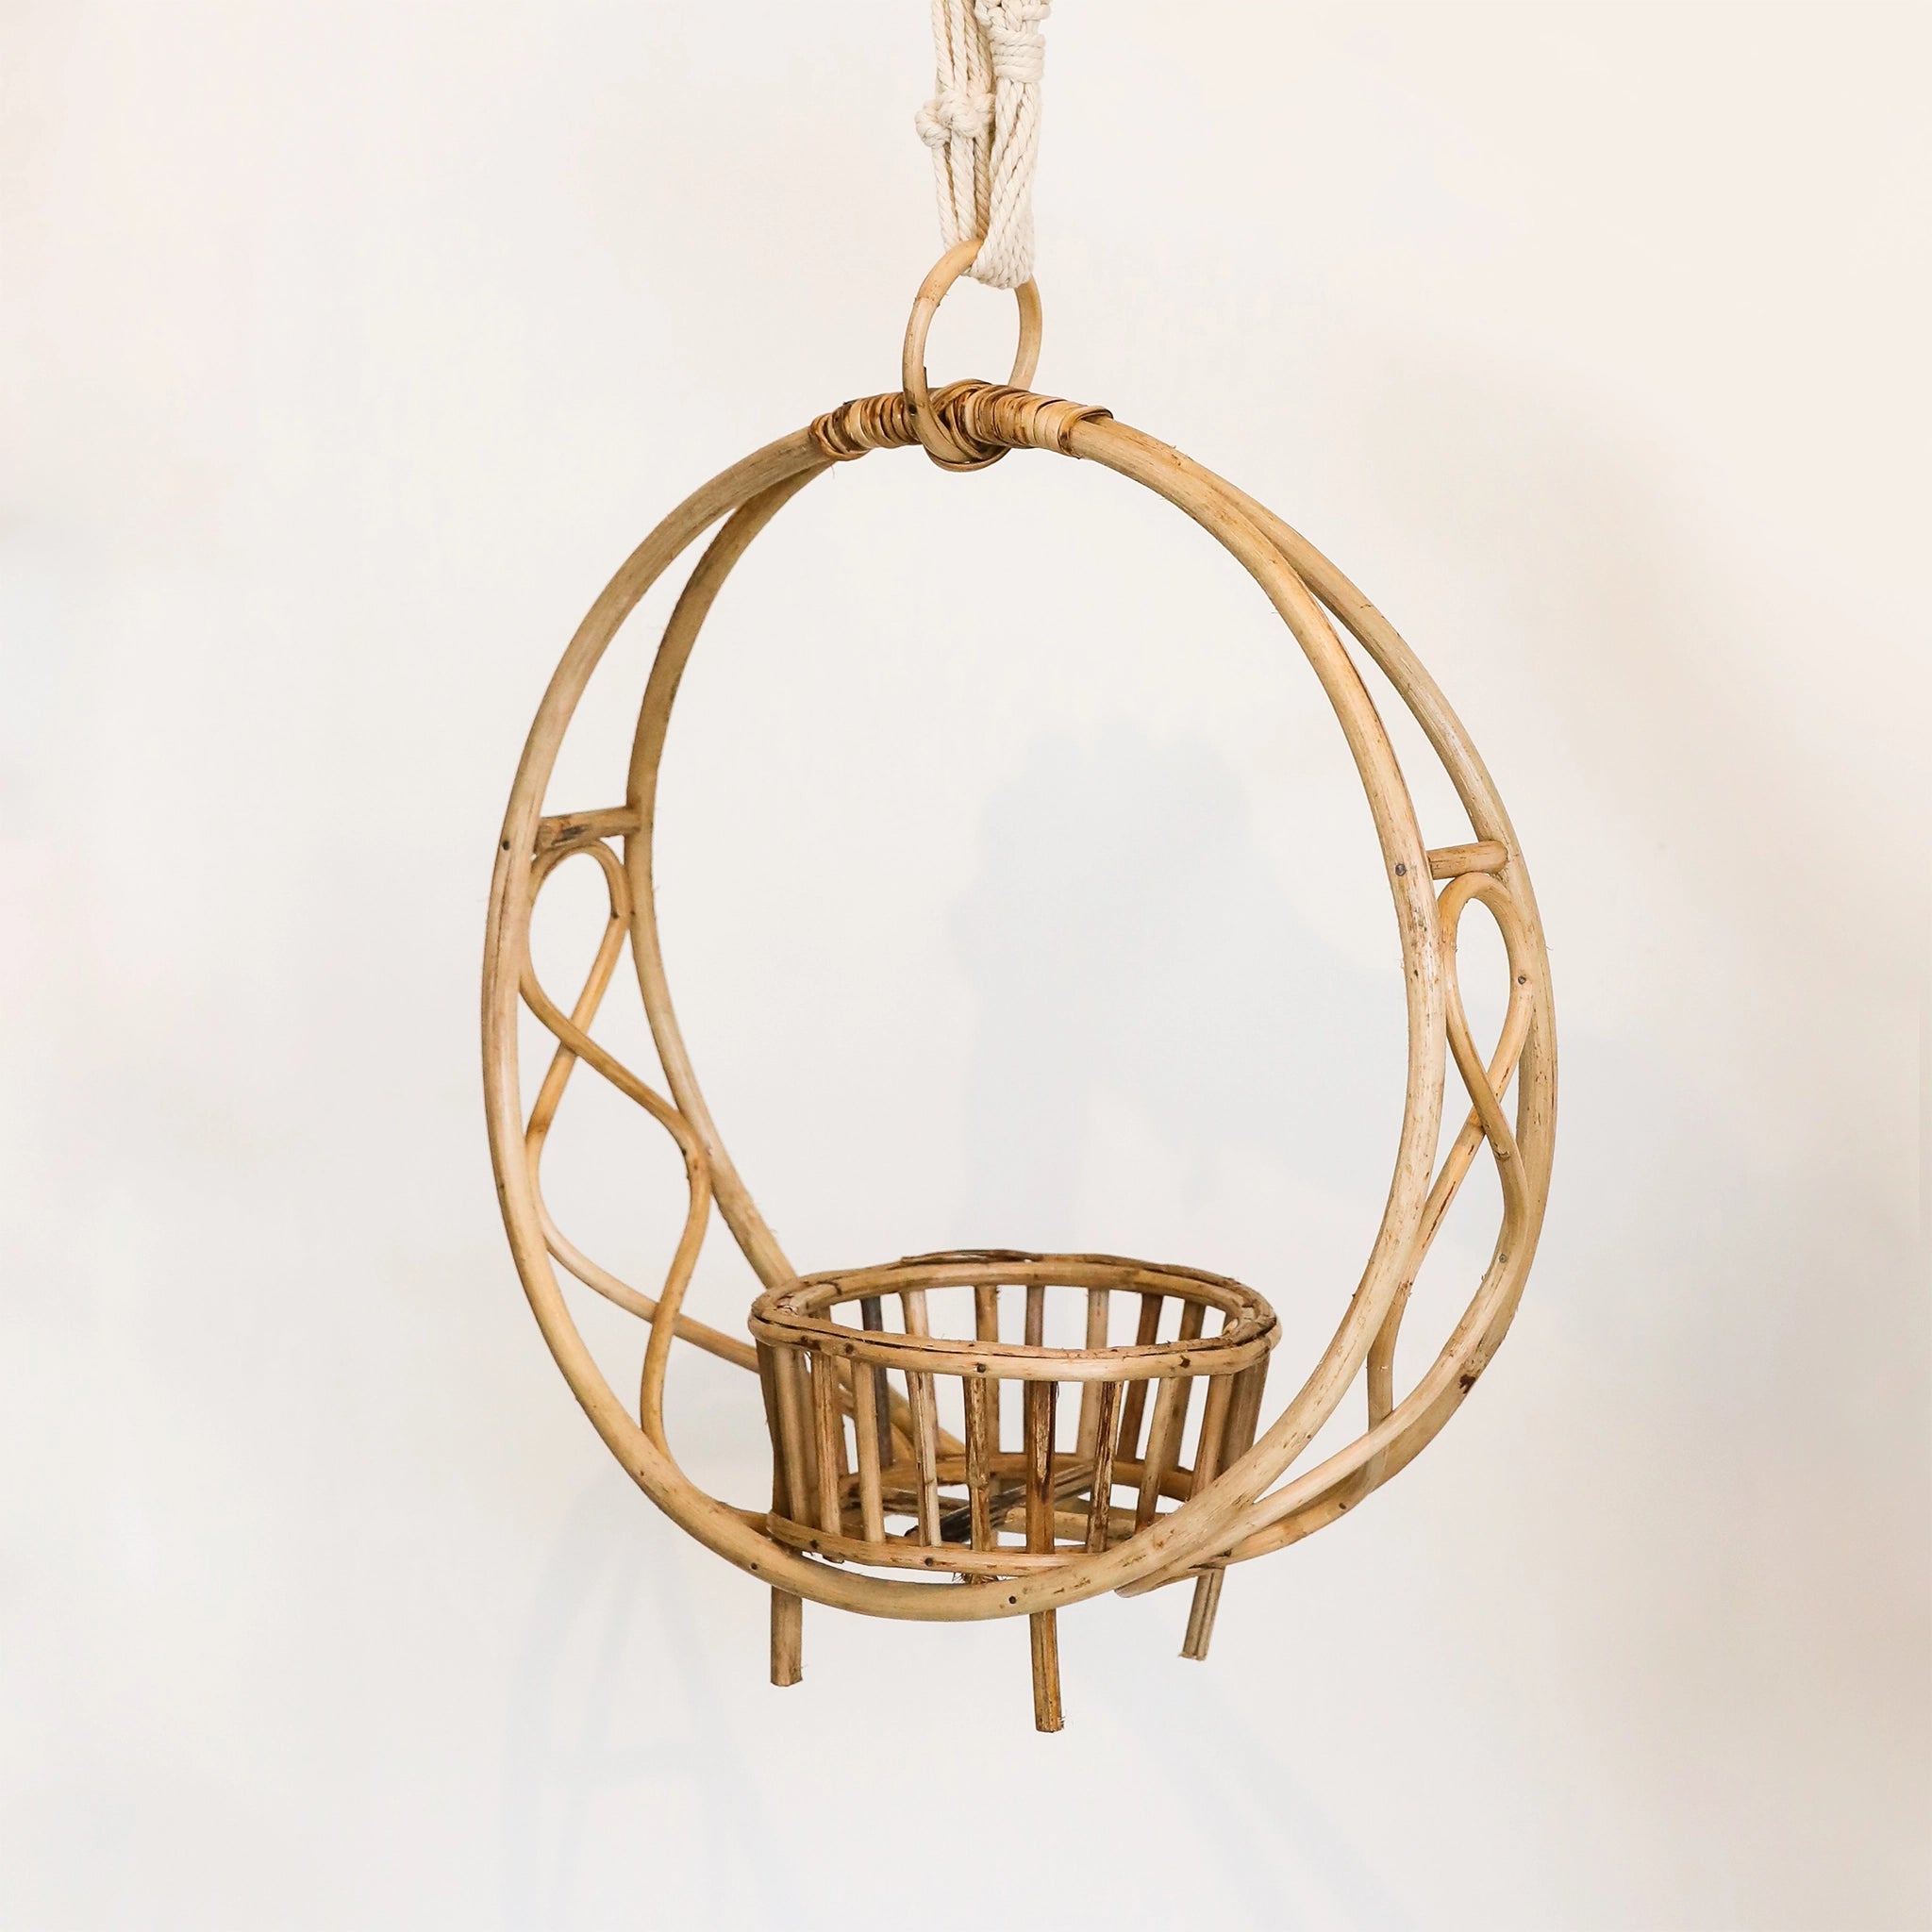 In front of a white background is a circle rattan plant holder. On the bottom inside of the holder is a rattan pot to hold the plant. Below the rattan pot is four rattan pegs. At the top of the rattan circle is a small rattan hook. There is a hand holding a piece of rope that is attached to the hook.